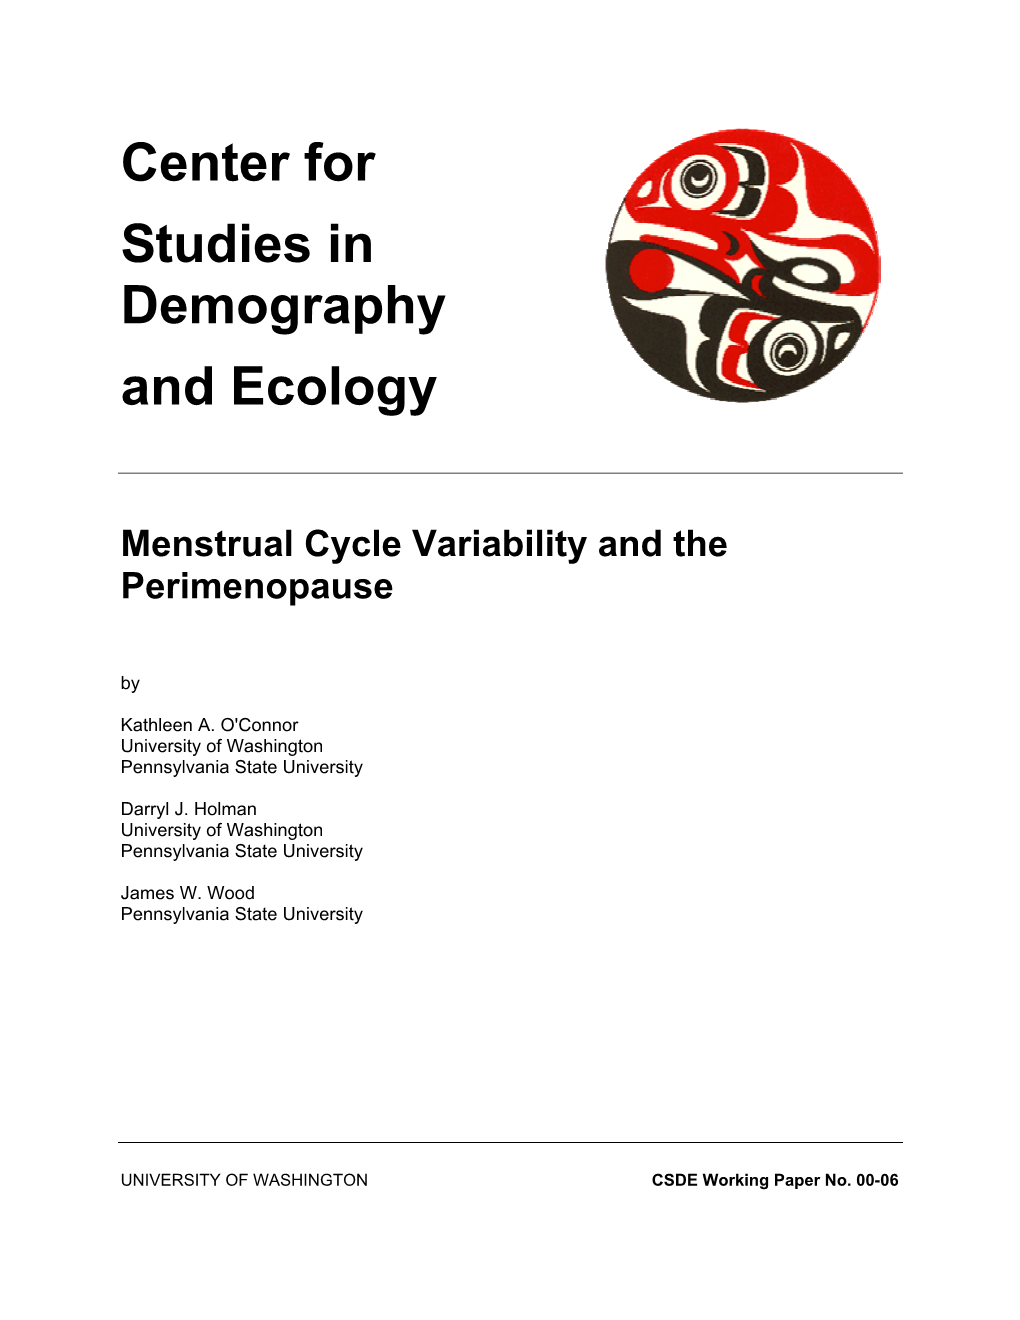 Center for Studies in Demography and Ecology Menstrual Cycle